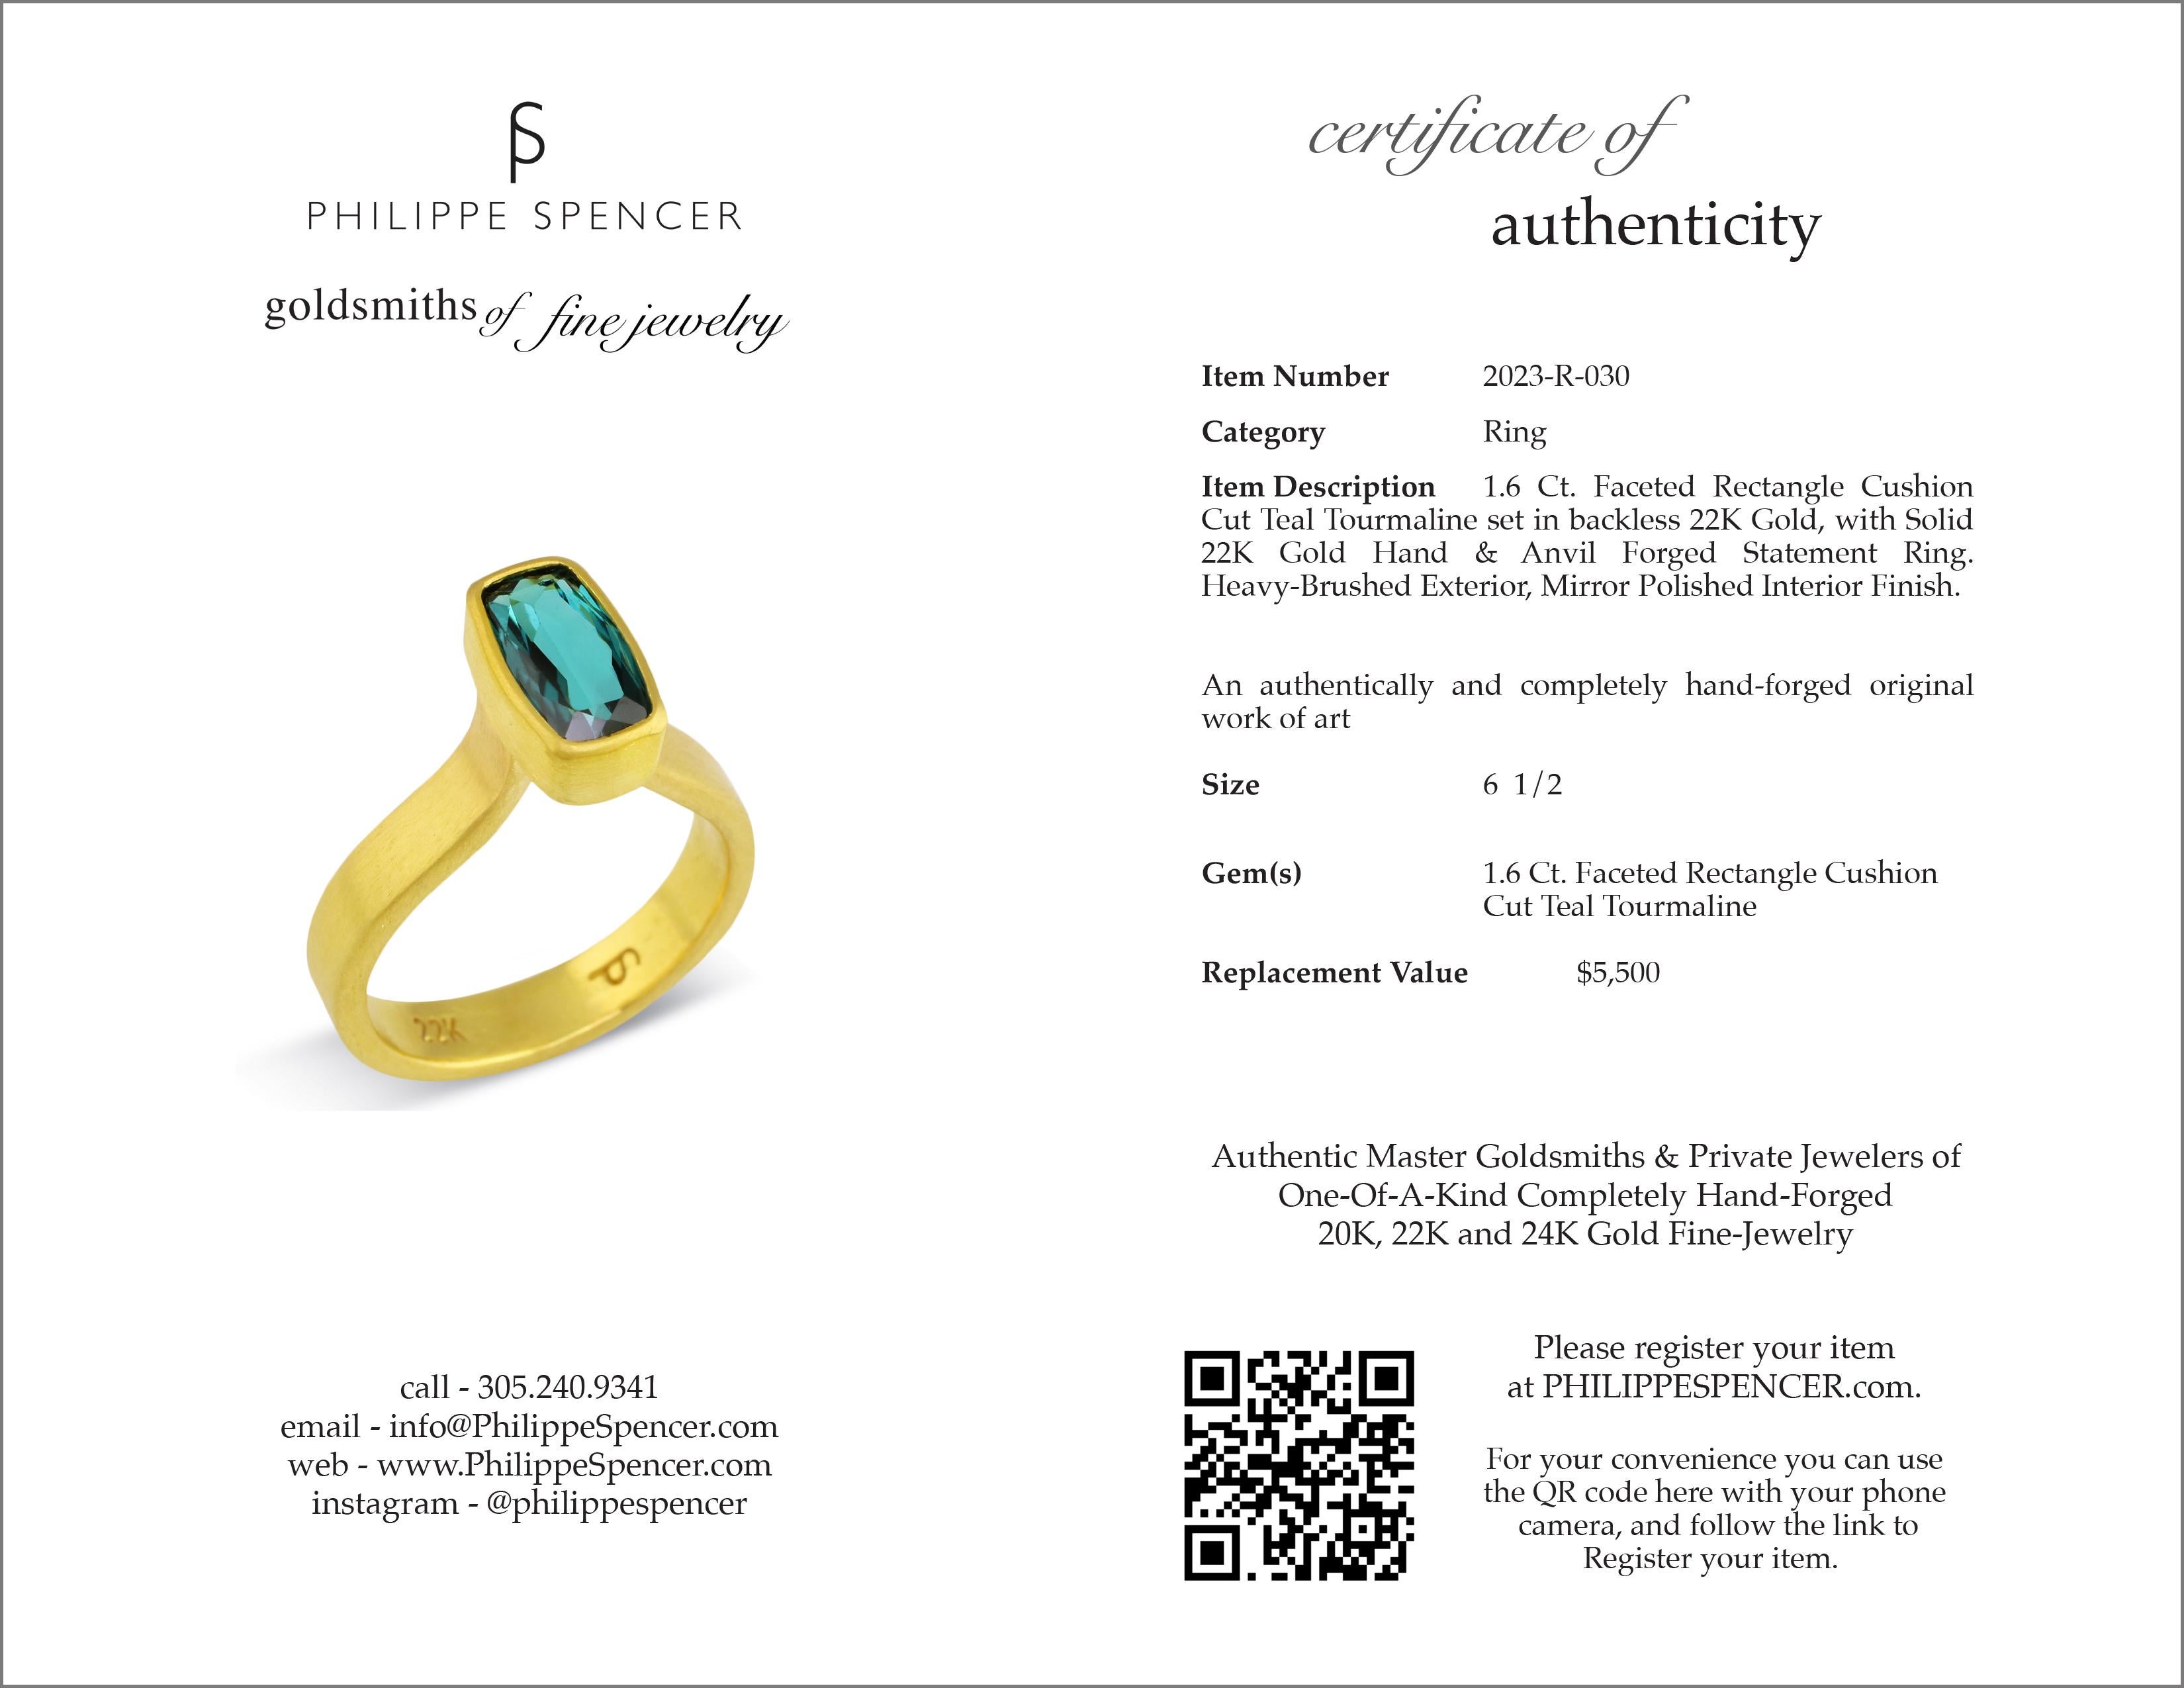 Cushion Cut PHILIPPE SPENCER 1.6 Ct. Teal Tourmaline Statement Ring in 22K Gold For Sale